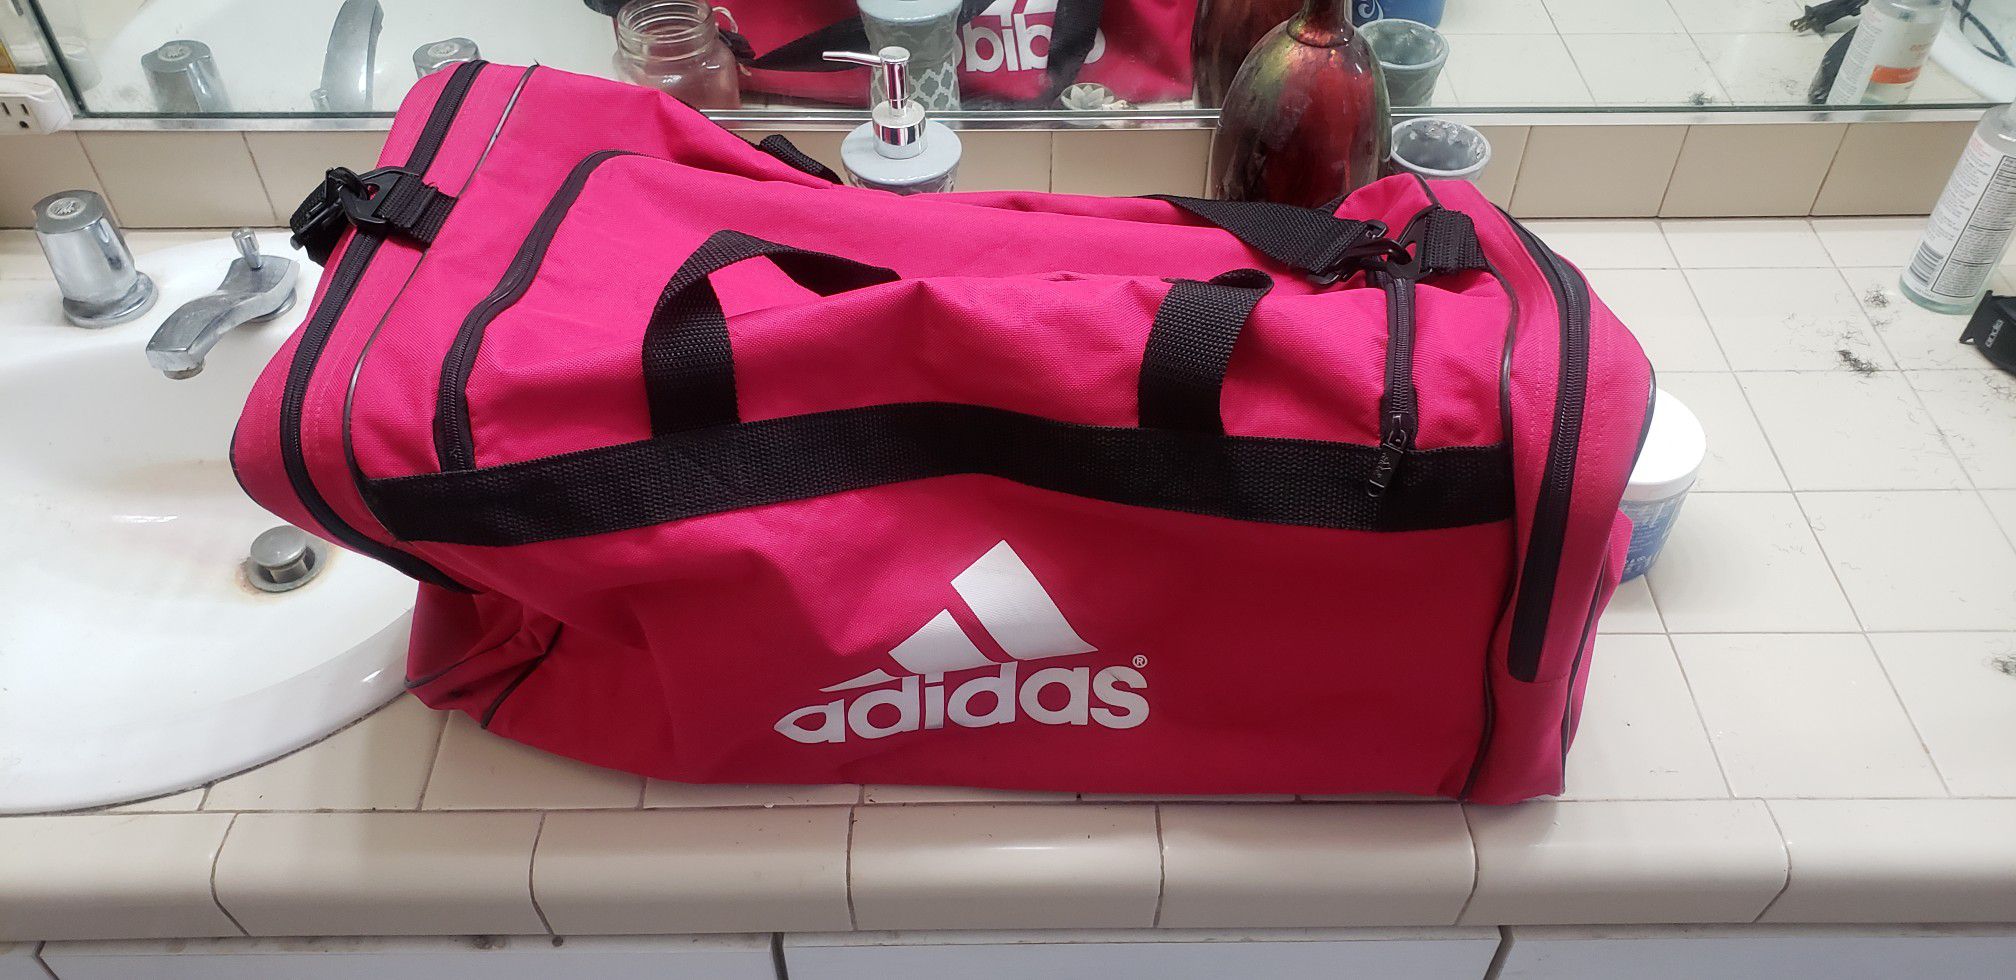 Adidas duffle sports bag with major league soccer patch